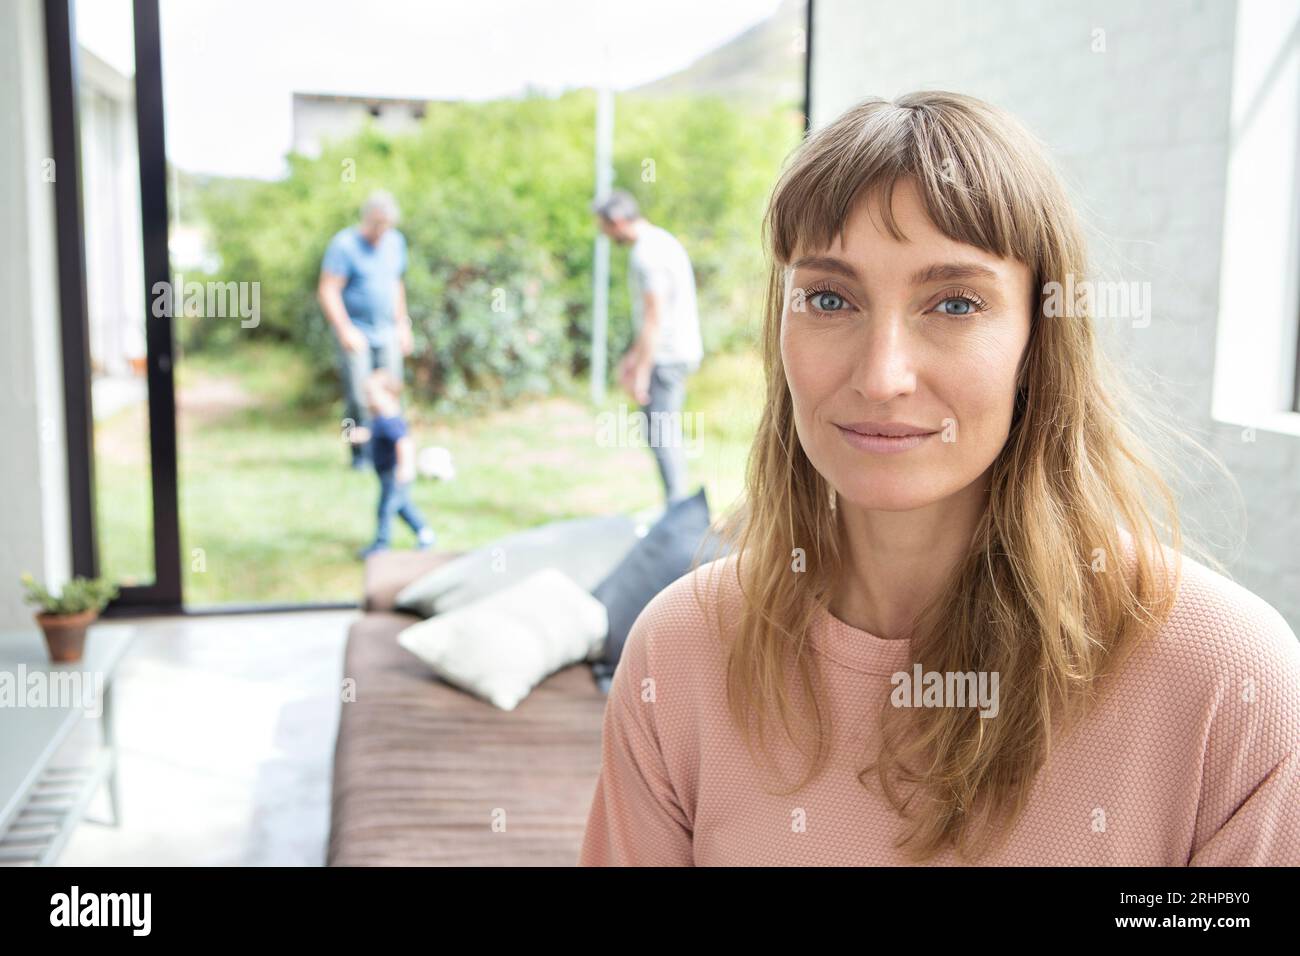 Middle aged woman Stock Photo - Alamy